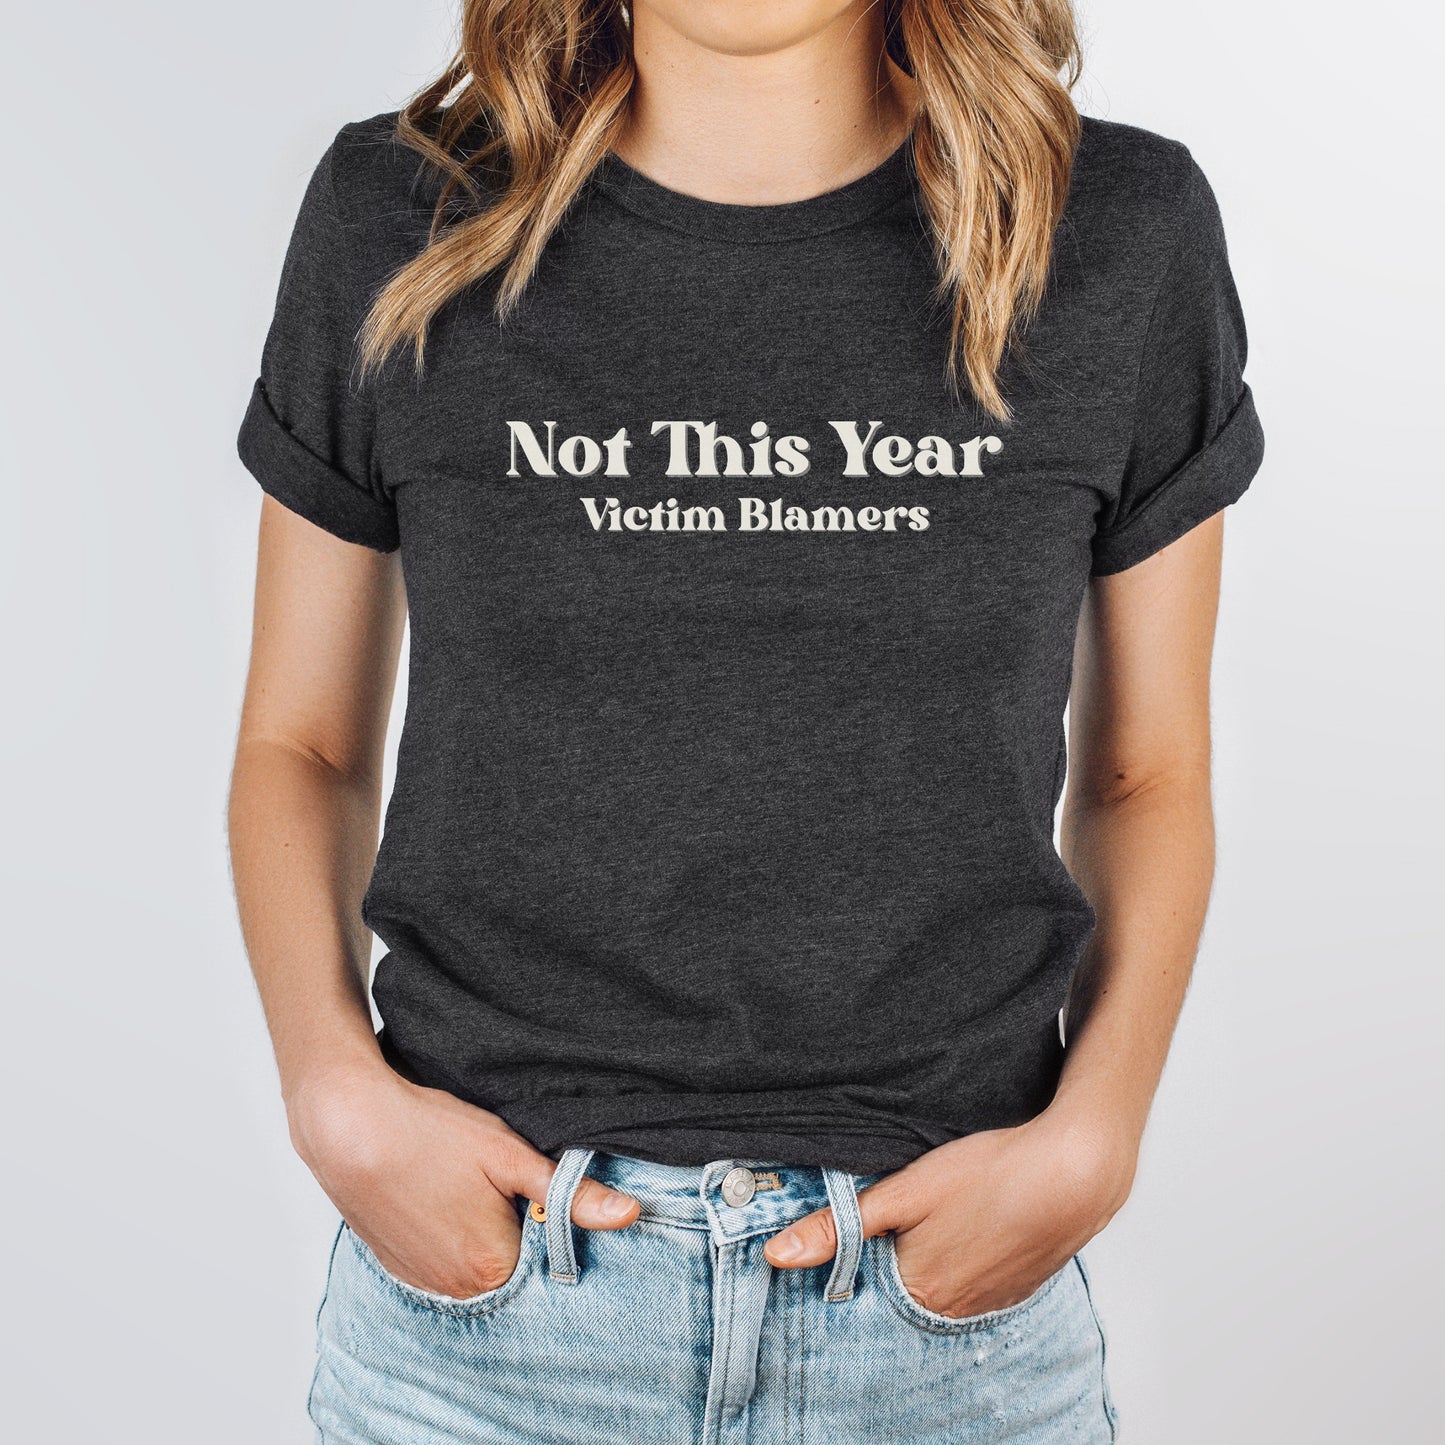 The front of the sweatshirt proudly displays the phrase "Not This Year Victim Blamers" in a bold and eye-catching font. This message serves as a reminder that we reject victim-blaming and support those who have faced injustice.